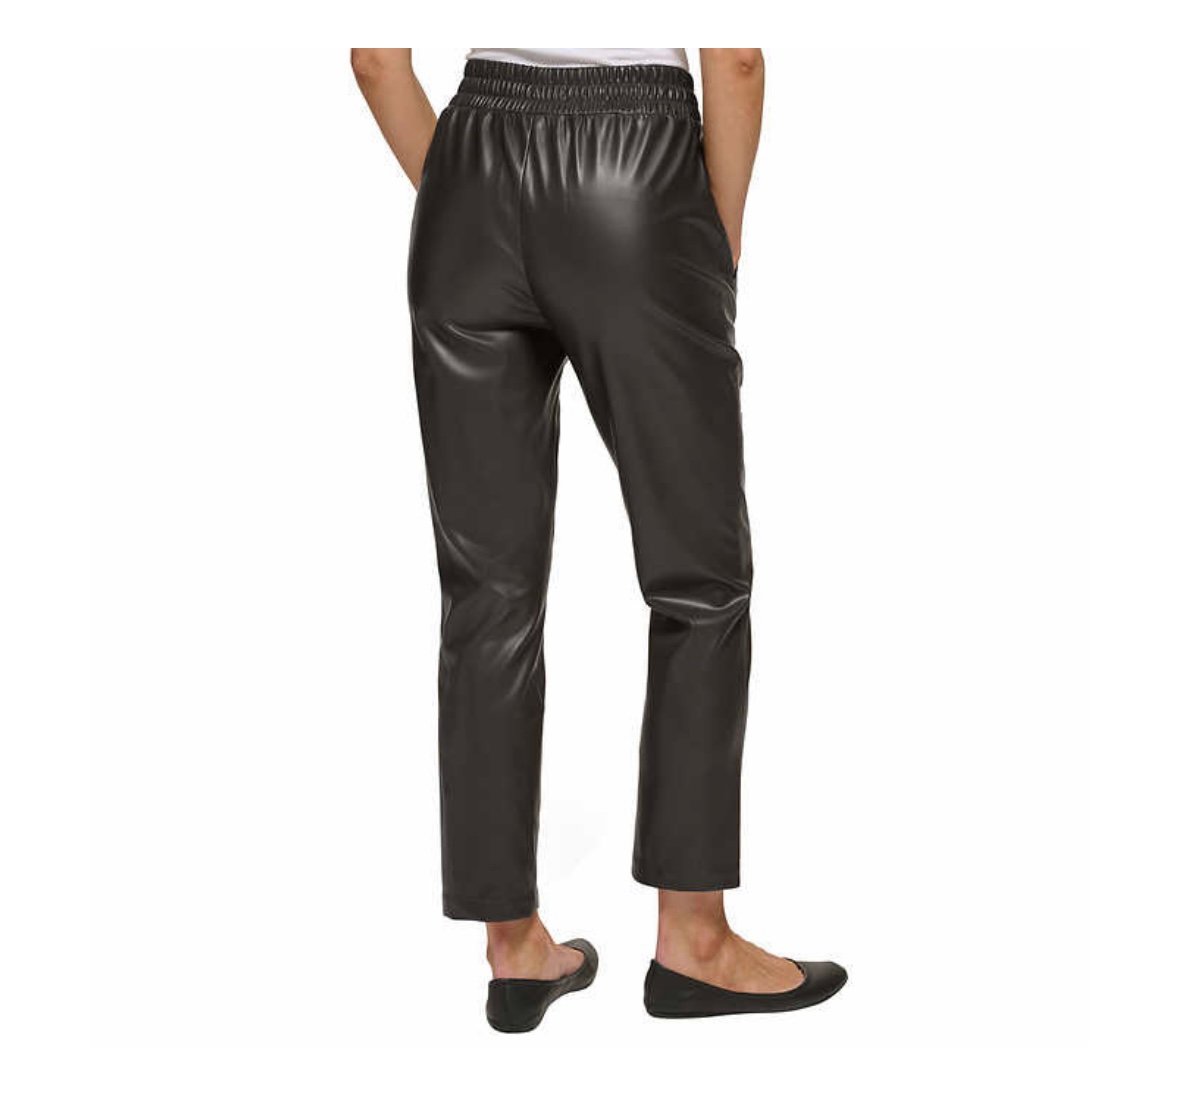 where to buy  DKNY Ladies Faux Leather Pants j89qxt4RB just buy it